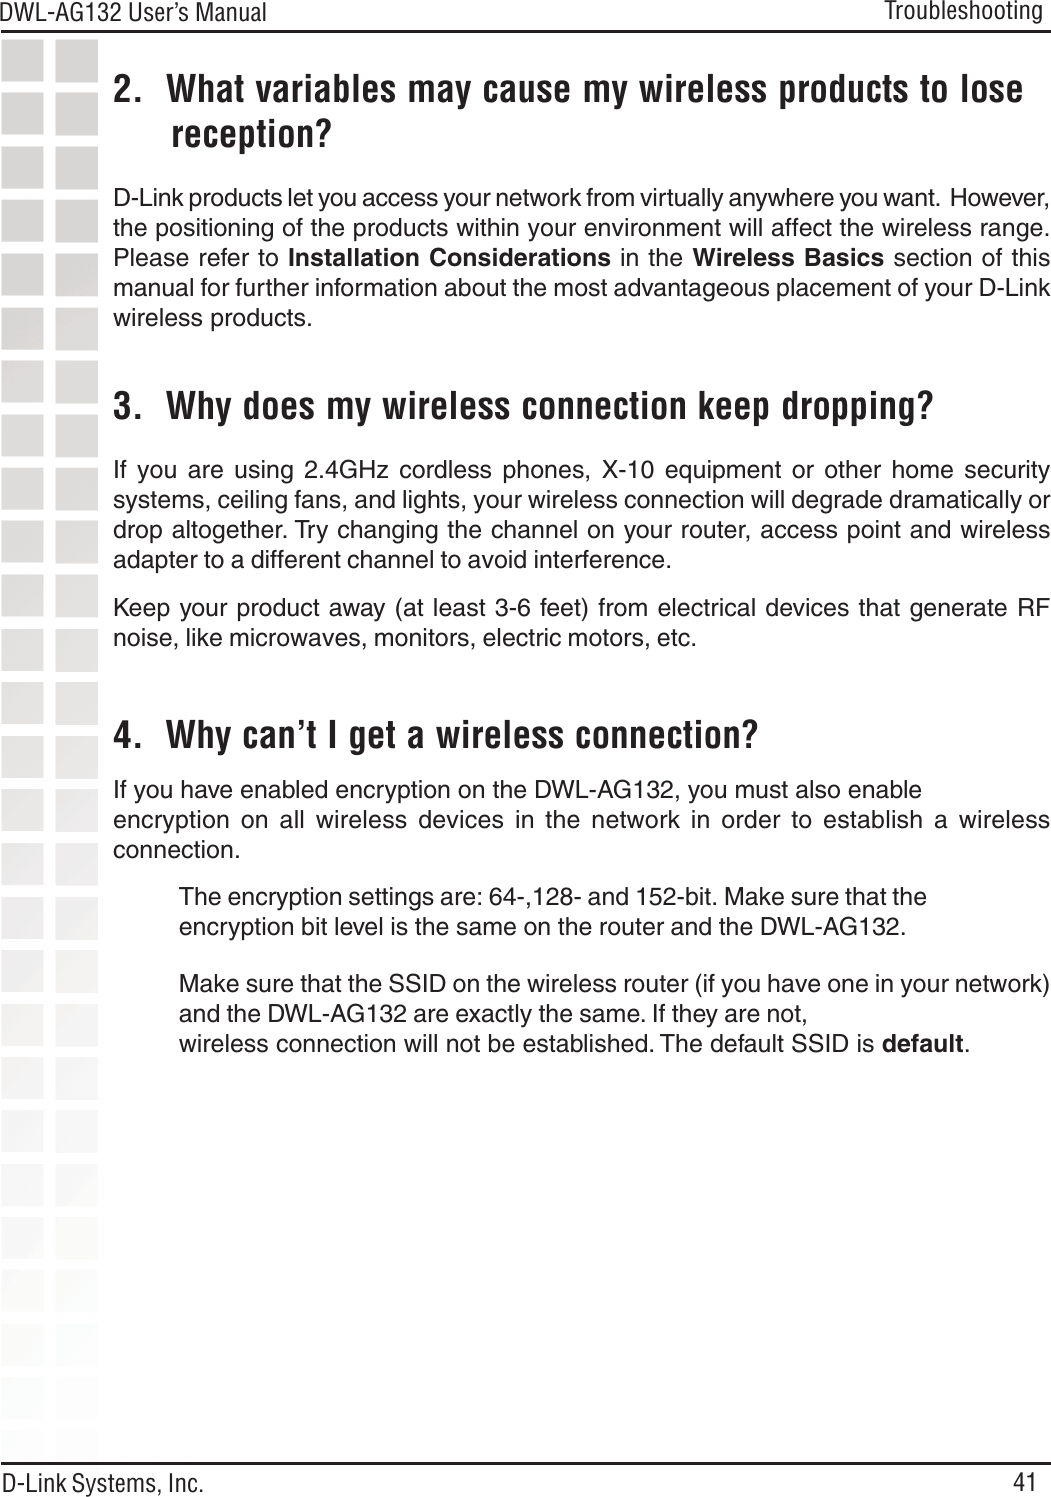 41DWL-AG132 User’s ManualD-Link Systems, Inc.Troubleshooting2.  What variables may cause my wireless products to lose      reception?D-Link products let you access your network from virtually anywhere you want.  However,the positioning of the products within your environment will affect the wireless range.Please refer to Installation Considerations in the Wireless Basics section of thismanual for further information about the most advantageous placement of your D-Linkwireless products.3.  Why does my wireless connection keep dropping?4.  Why can’t I get a wireless connection?If you have enabled encryption on the DWL-AG132, you must also enableencryption on all wireless devices in the network in order to establish a wirelessconnection.If you are using 2.4GHz cordless phones, X-10 equipment or other home securitysystems, ceiling fans, and lights, your wireless connection will degrade dramatically ordrop altogether. Try changing the channel on your router, access point and wirelessadapter to a different channel to avoid interference.Keep your product away (at least 3-6 feet) from electrical devices that generate RFnoise, like microwaves, monitors, electric motors, etc.The encryption settings are: 64-,128- and 152-bit. Make sure that theencryption bit level is the same on the router and the DWL-AG132.Make sure that the SSID on the wireless router (if you have one in your network)and the DWL-AG132 are exactly the same. If they are not,wireless connection will not be established. The default SSID is default.